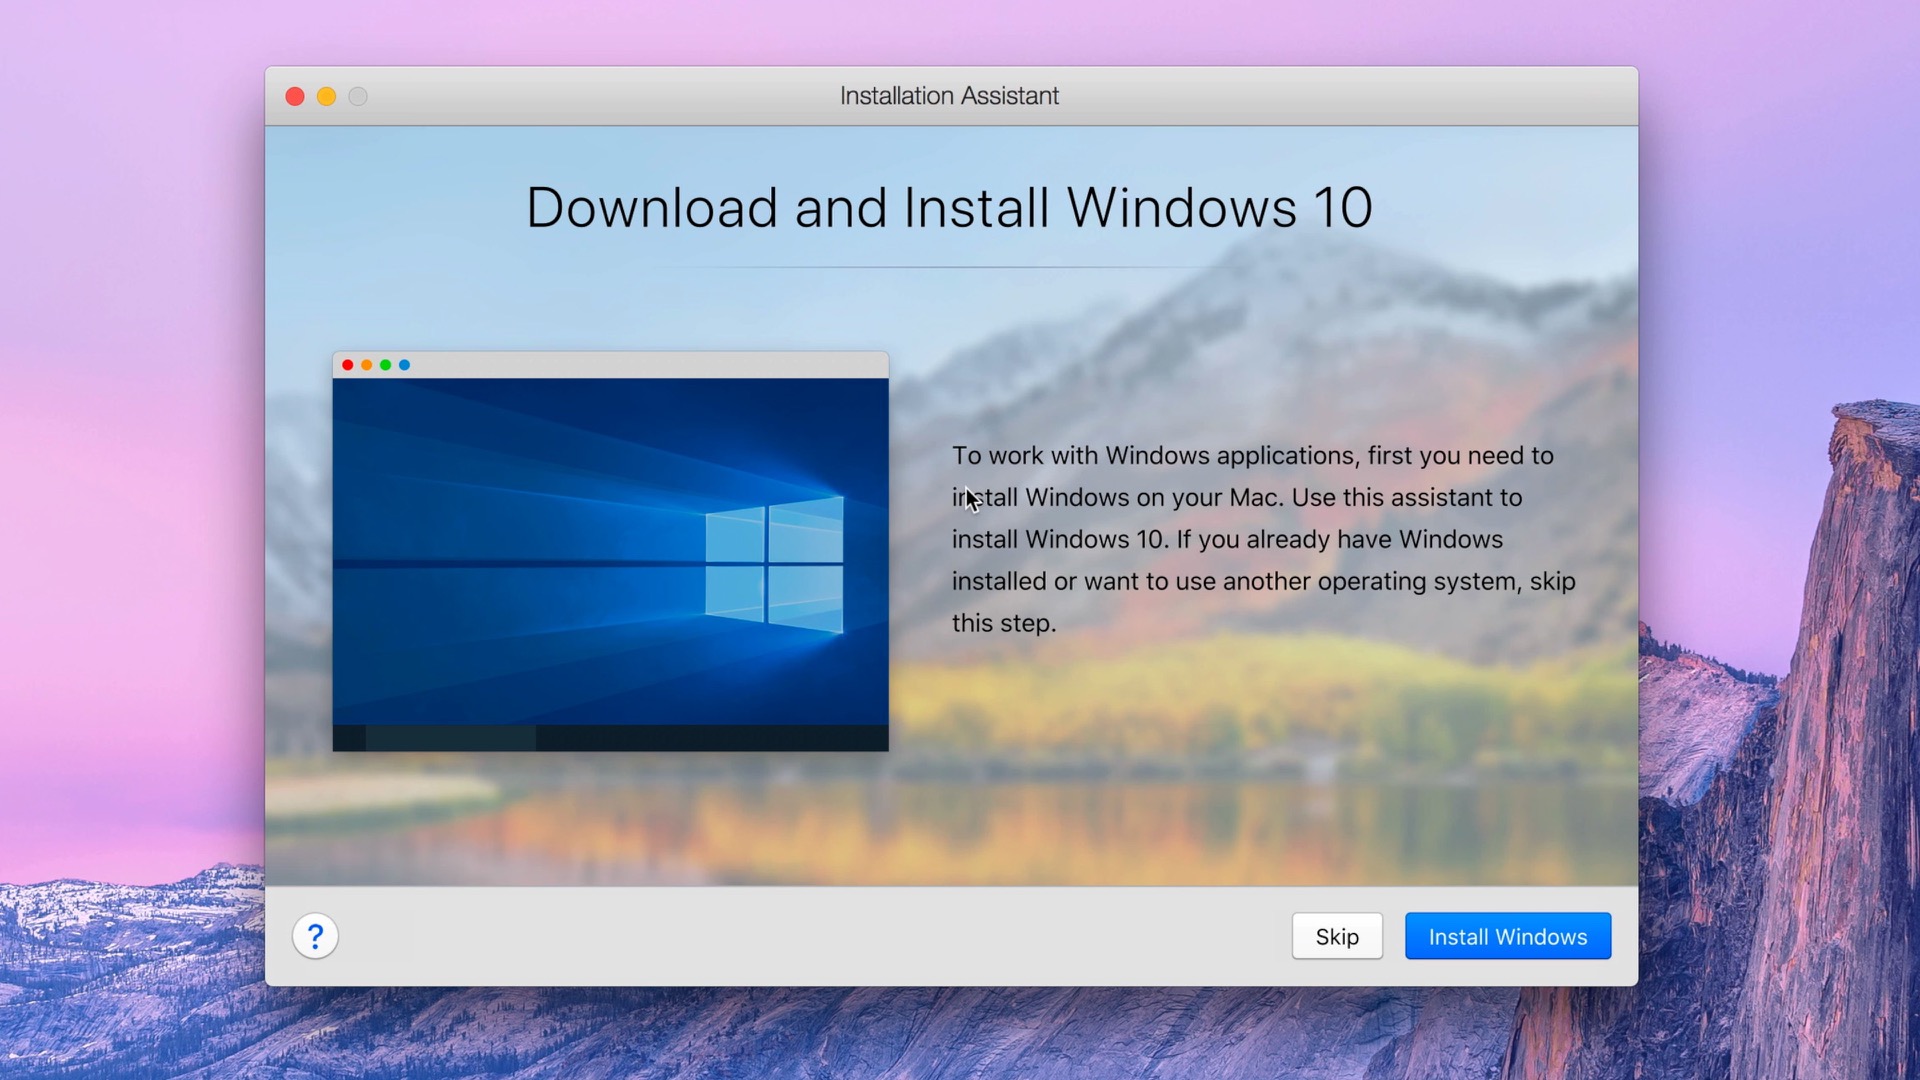 parallels desktop 13 paused automatically